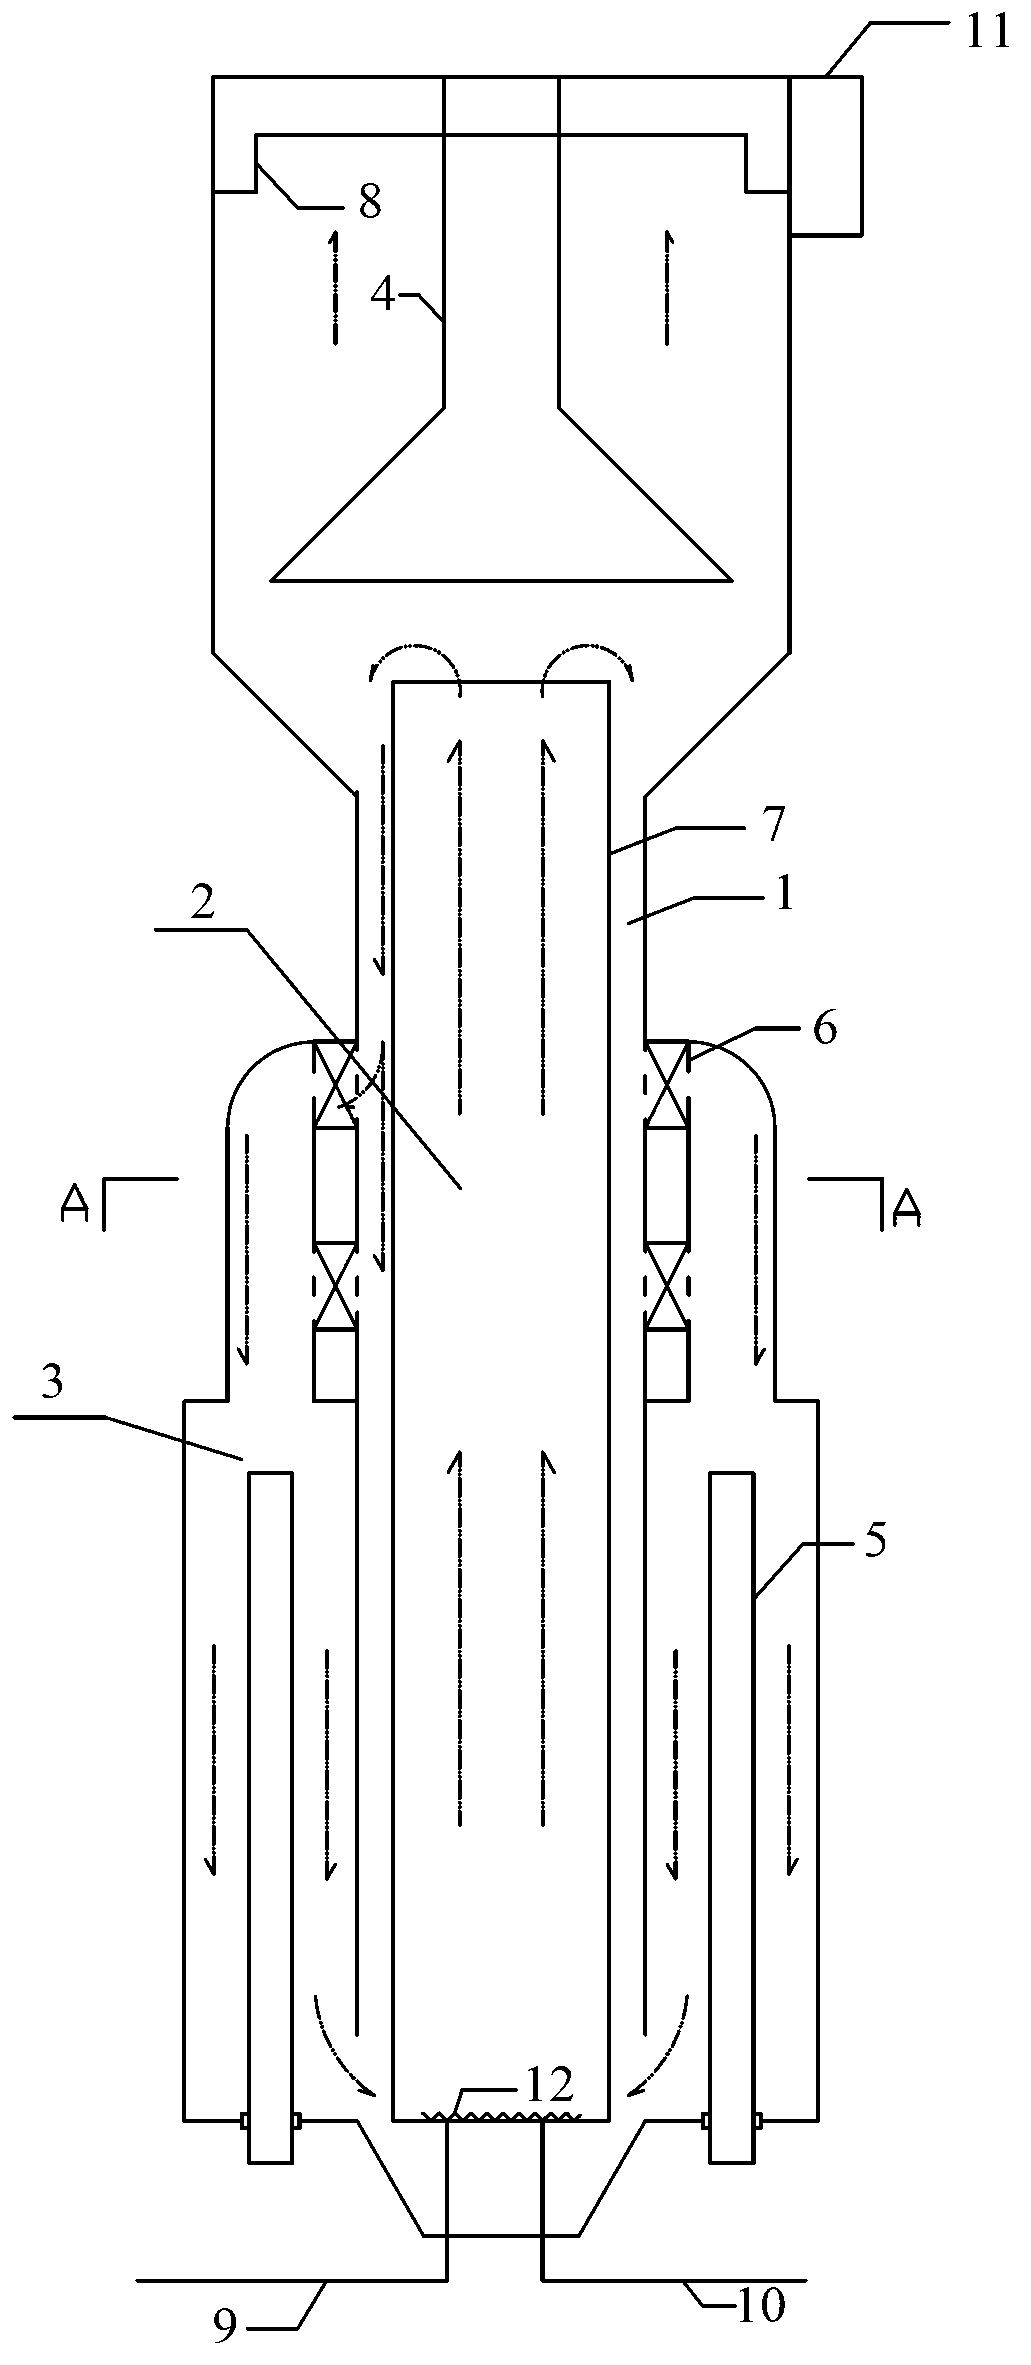 External-mounting photocatalytic - biological fluidized bed reactor